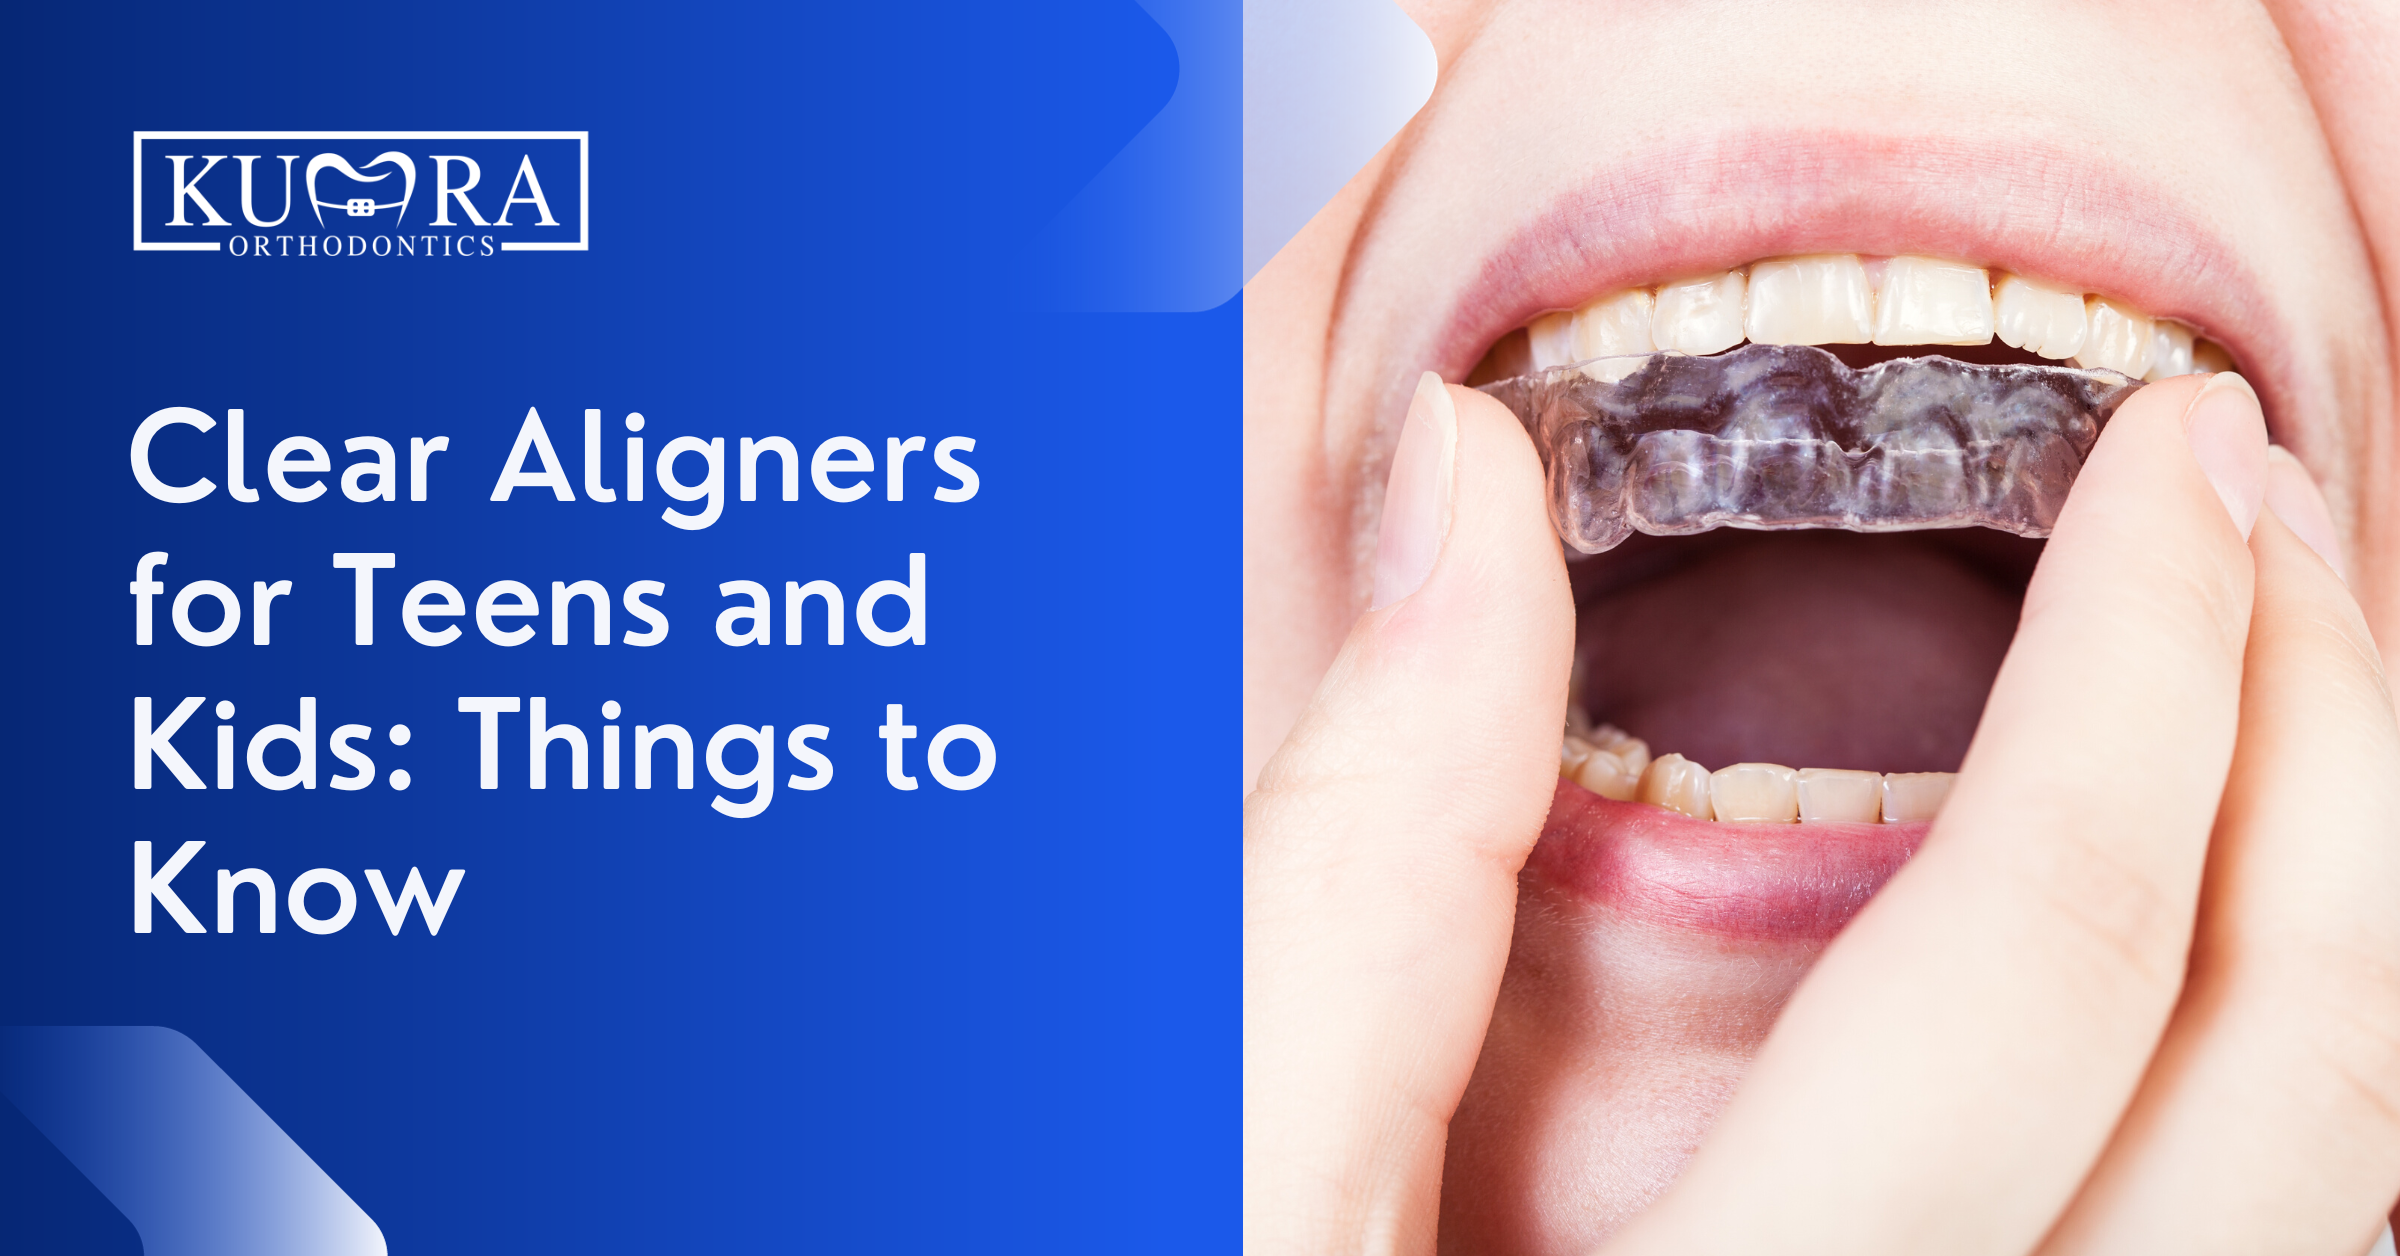 Free Hygiene Session with Invisalign